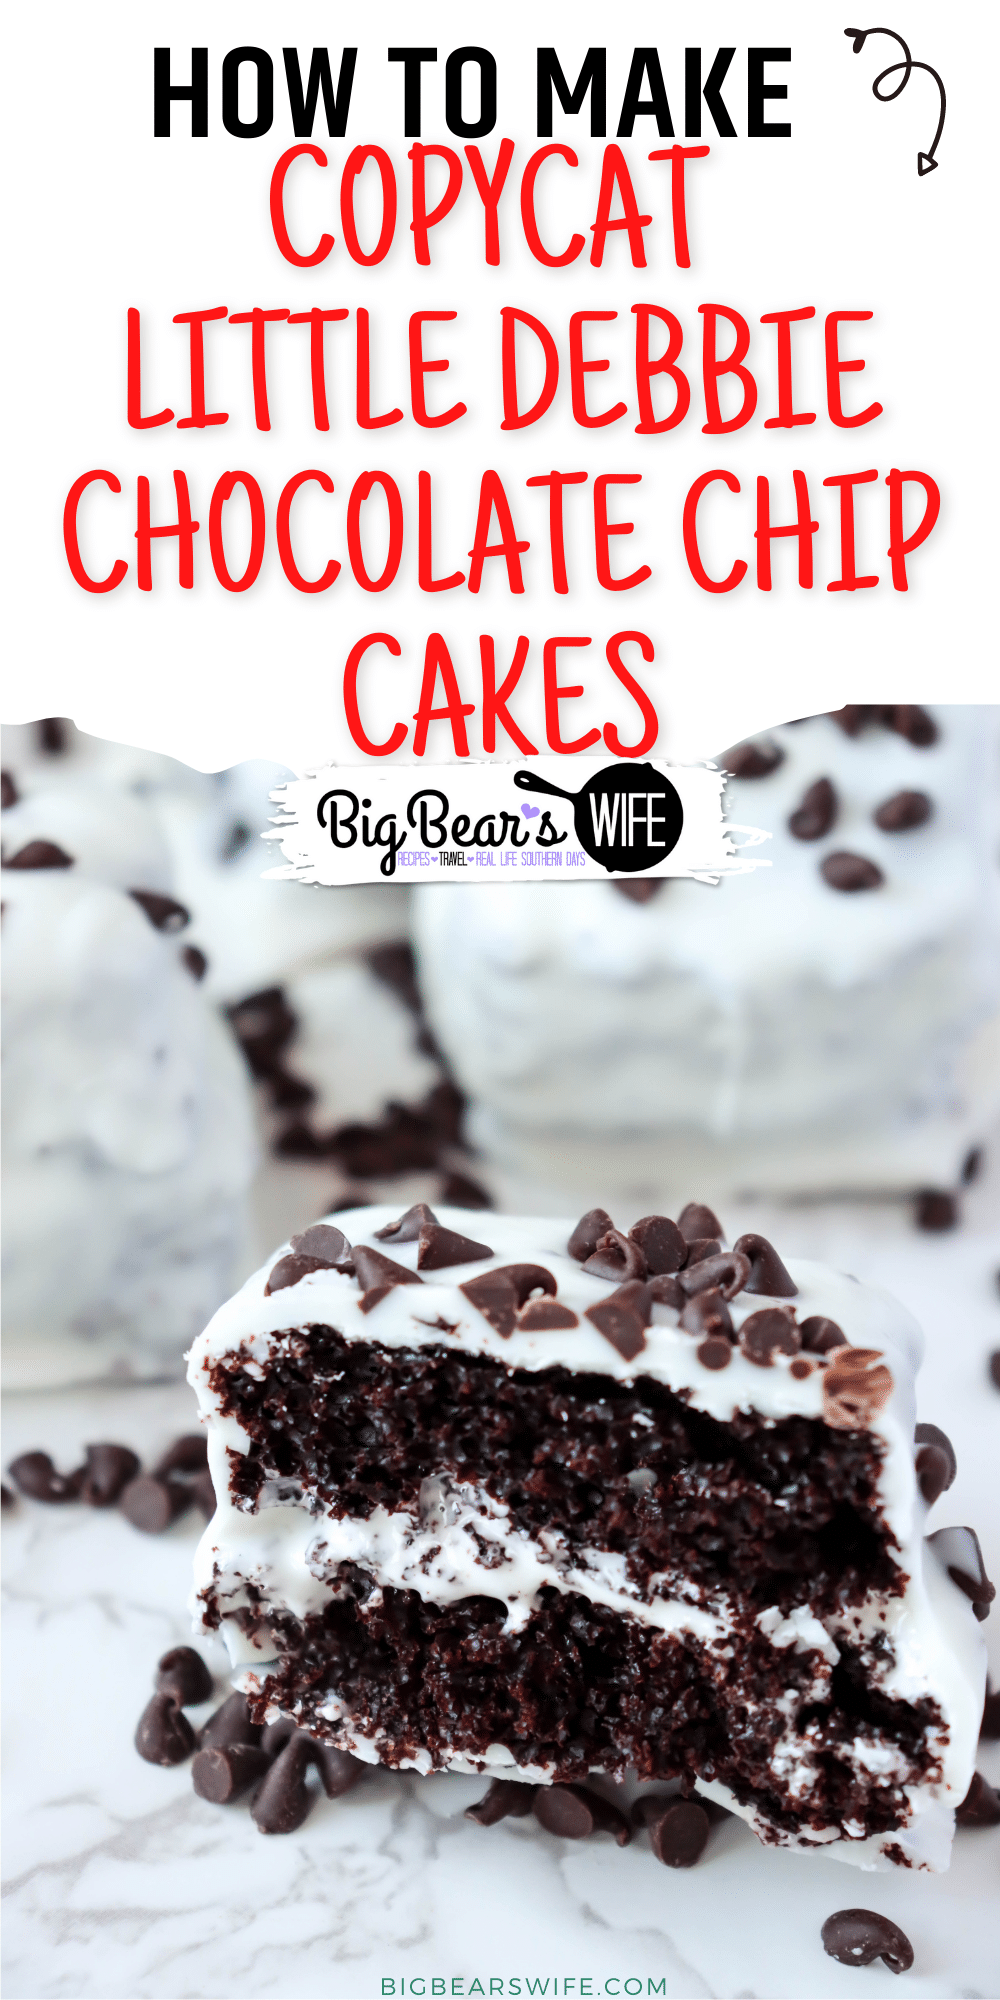 This recipe for CopyCat Little Debbie Chocolate Chip Cakes gives a homemade twist to these classic little cake treats! Layers of homemade chocolate cake with marshmallow cream centers, dipped in white chocolate and topped with mini chocolate chips.  via @bigbearswife